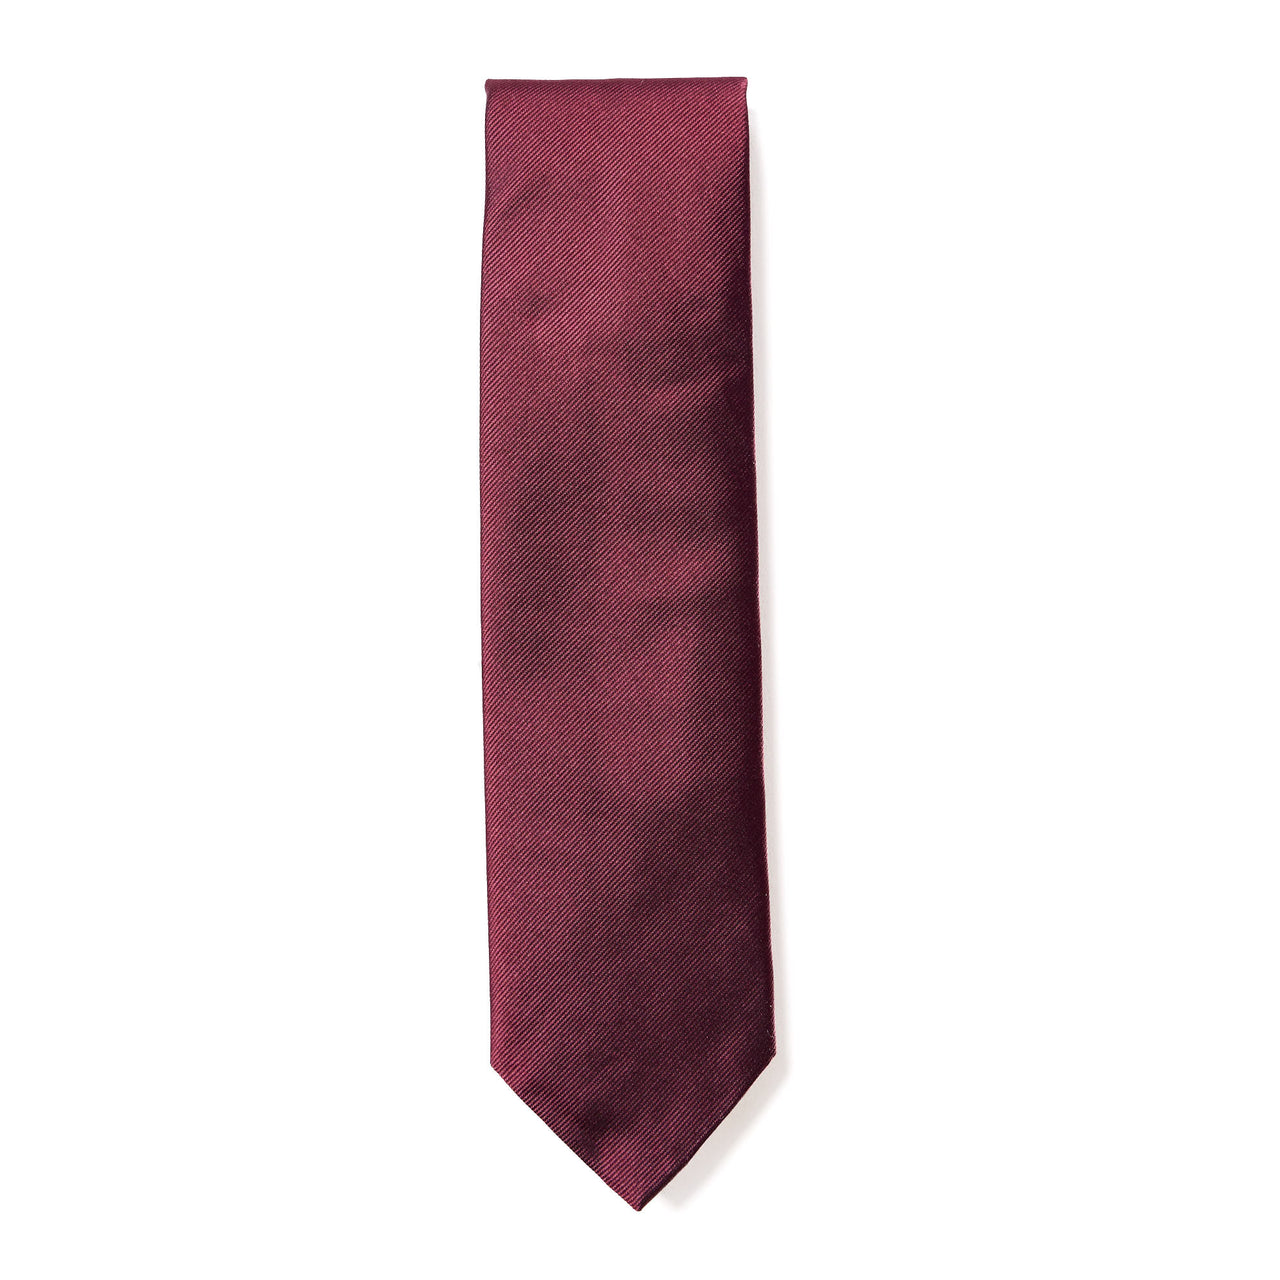 HENRY SARTORIAL X CANTINI Plain Woven Tie WINE RED